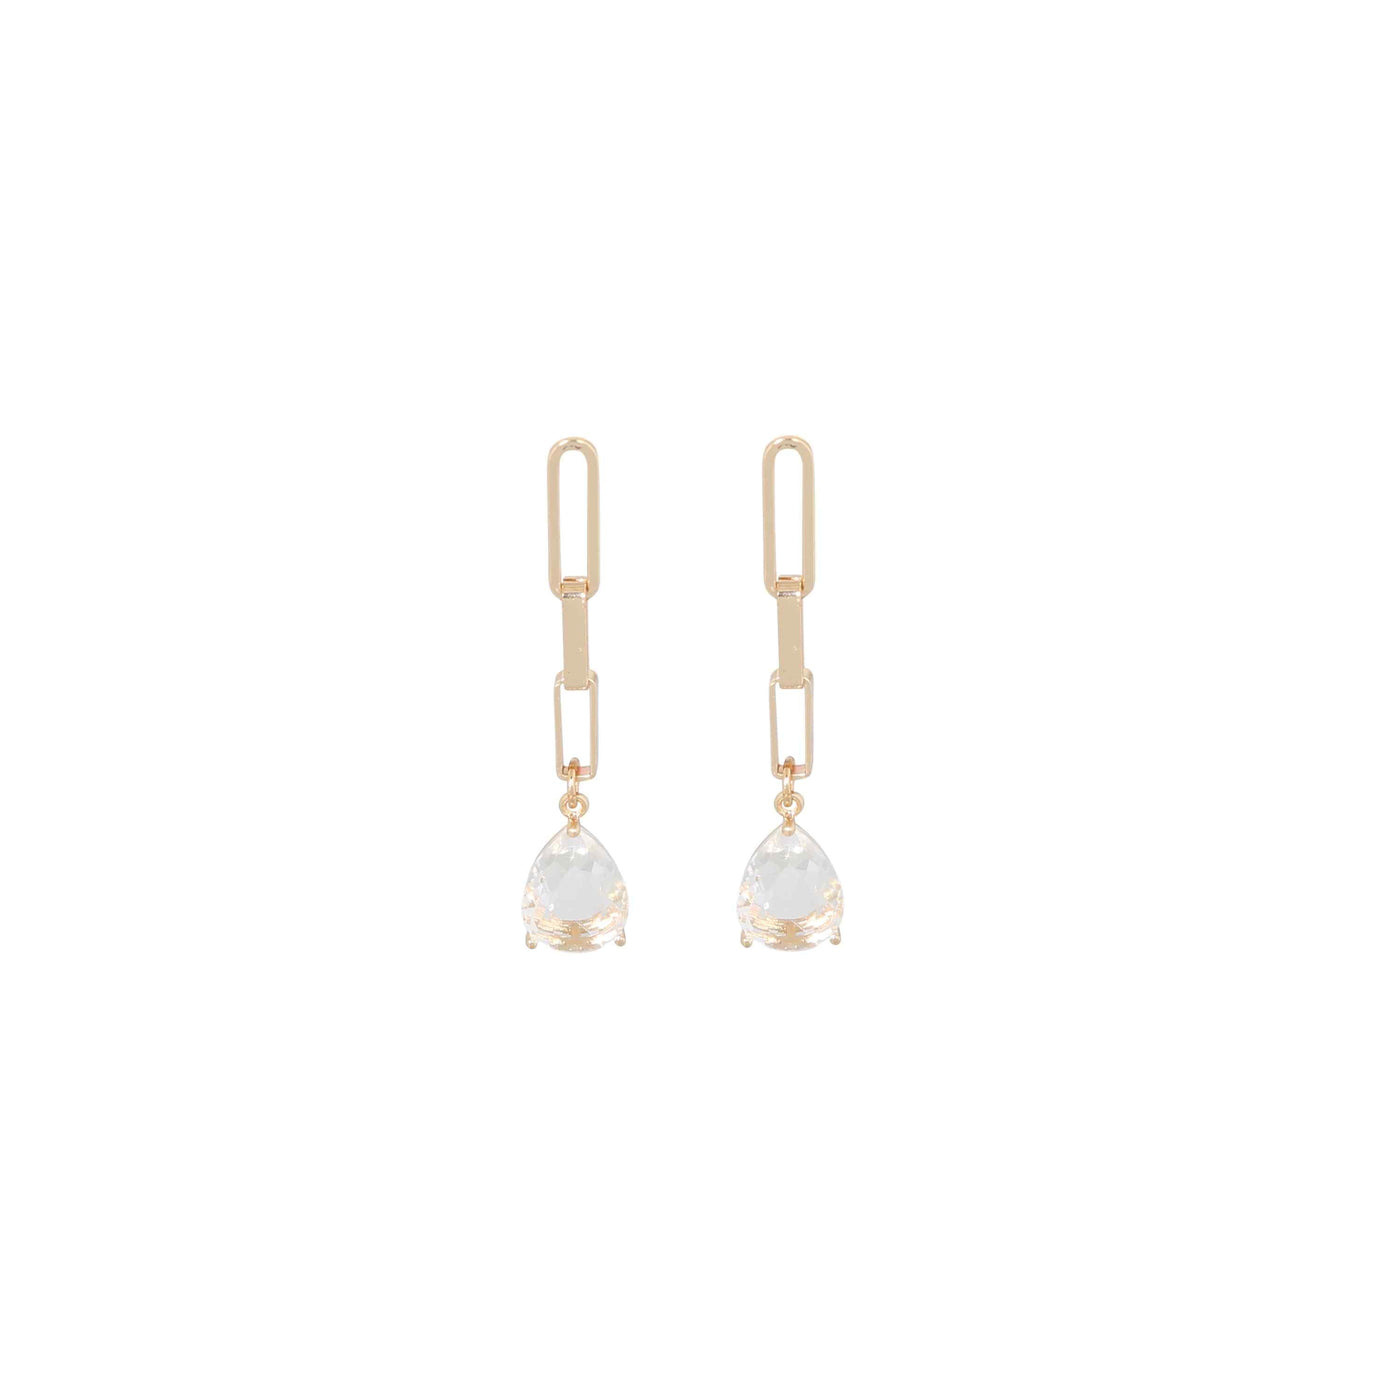 Merx - Paper Clip Earrings with Pendant Drop in Gold